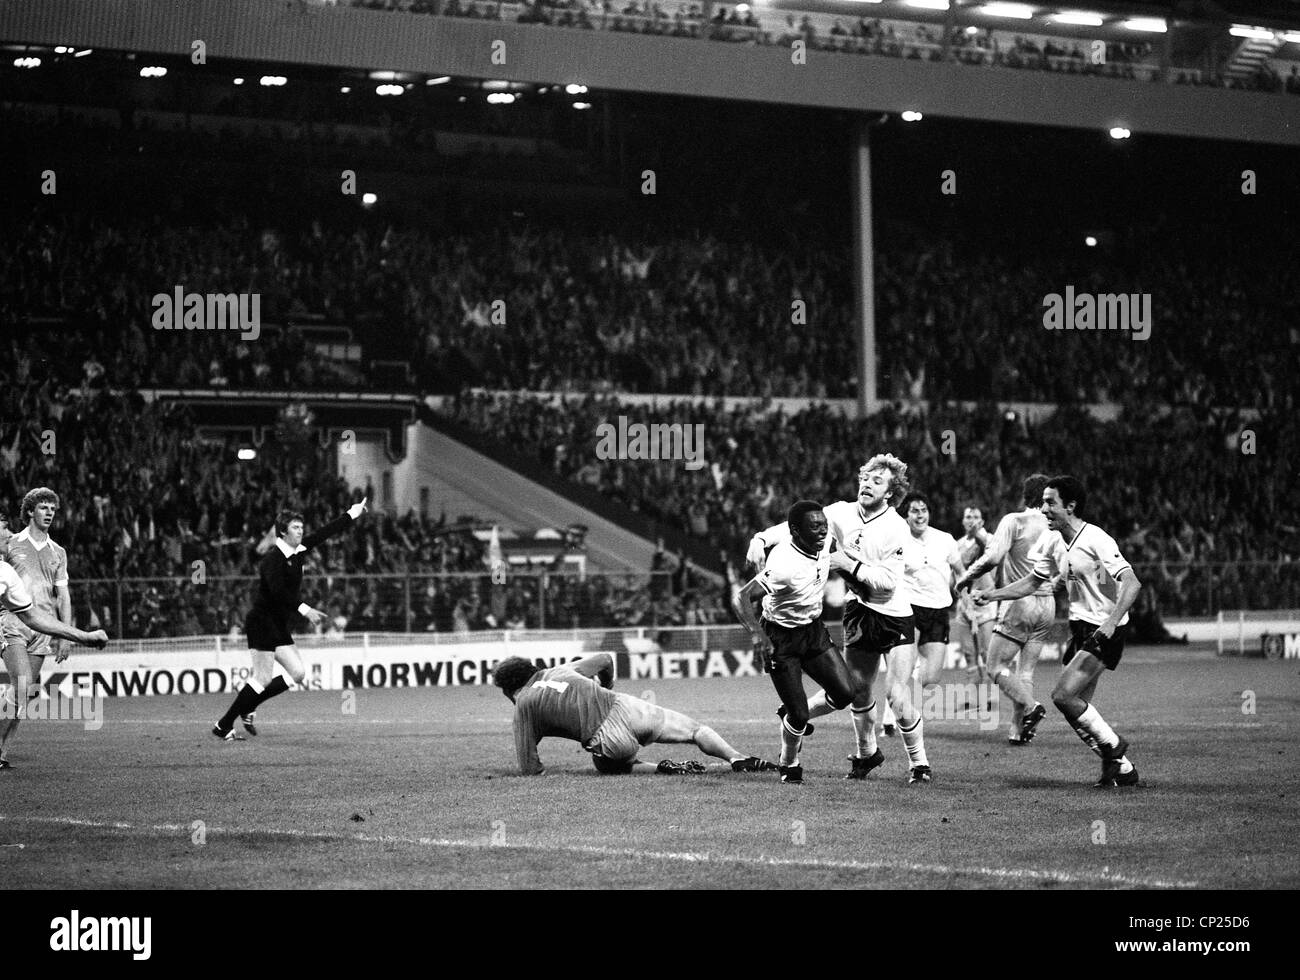 FA Cup Final replay Manchester City V Tottenham Hotspur at Wembley 14/5/1981 Spurs Garth Crooks celebrates his goal with Steve Archibald Stock Photo